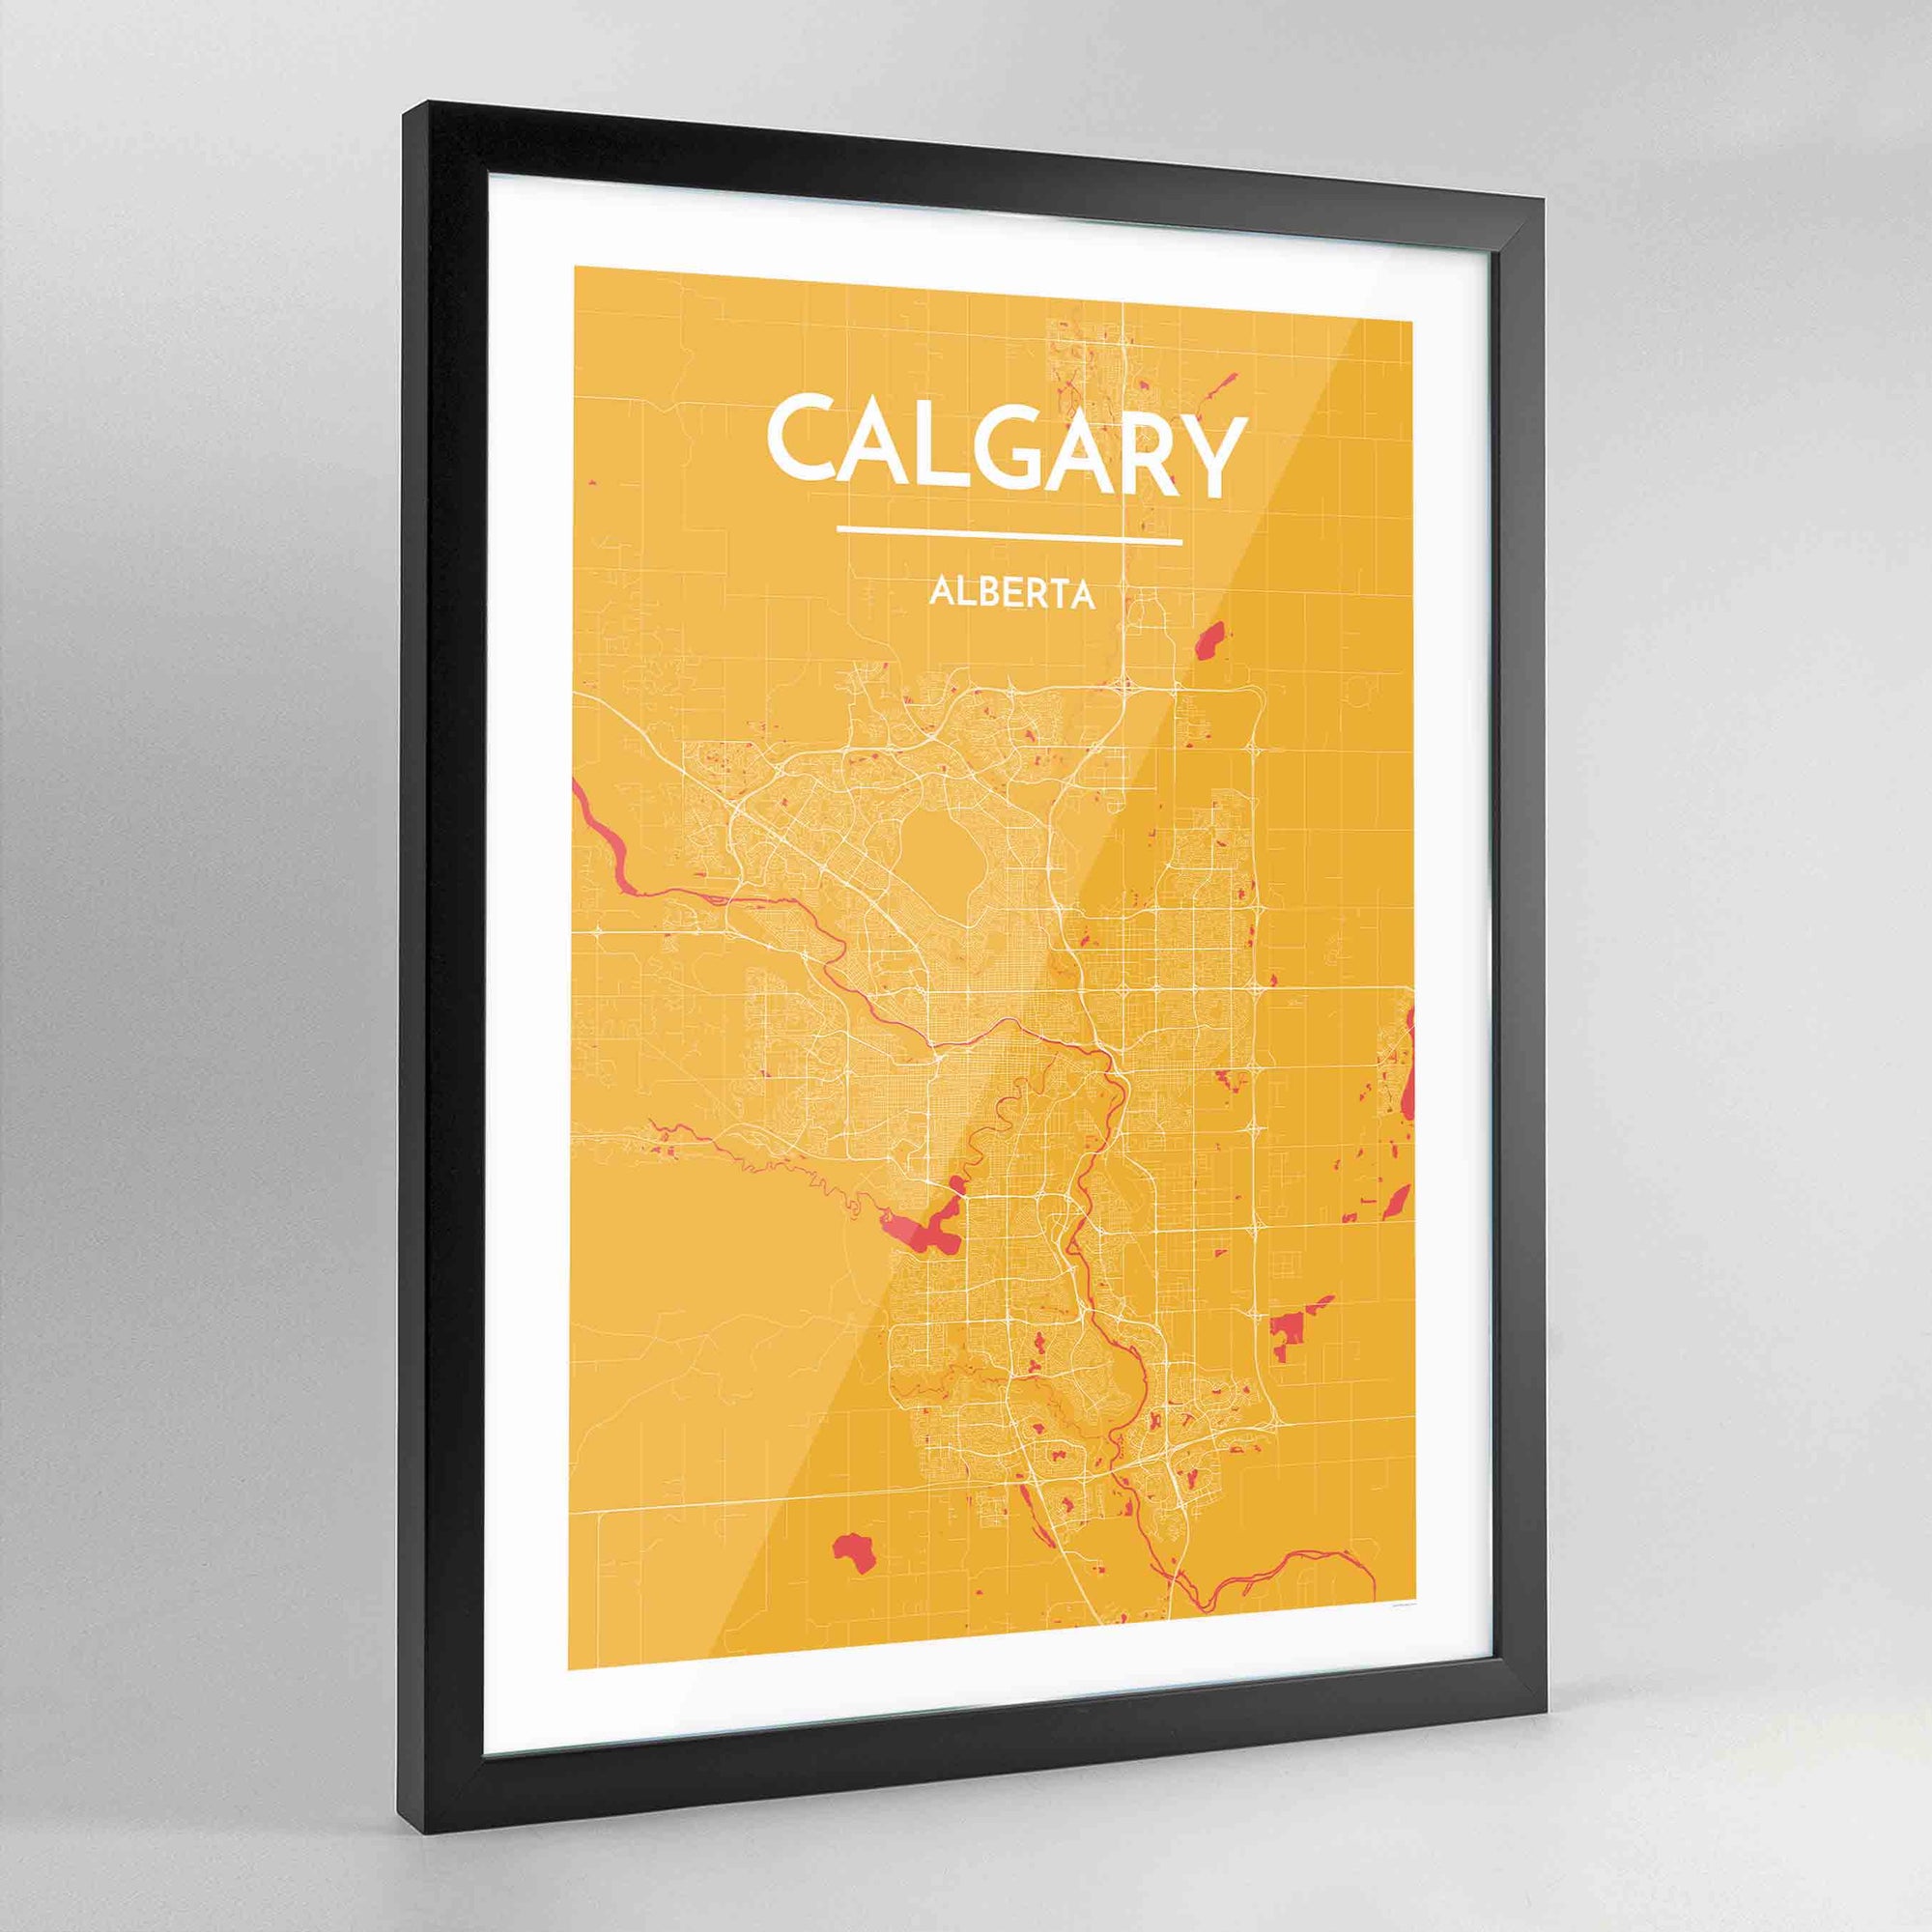 Framed Calgary City Map - Point Two Design